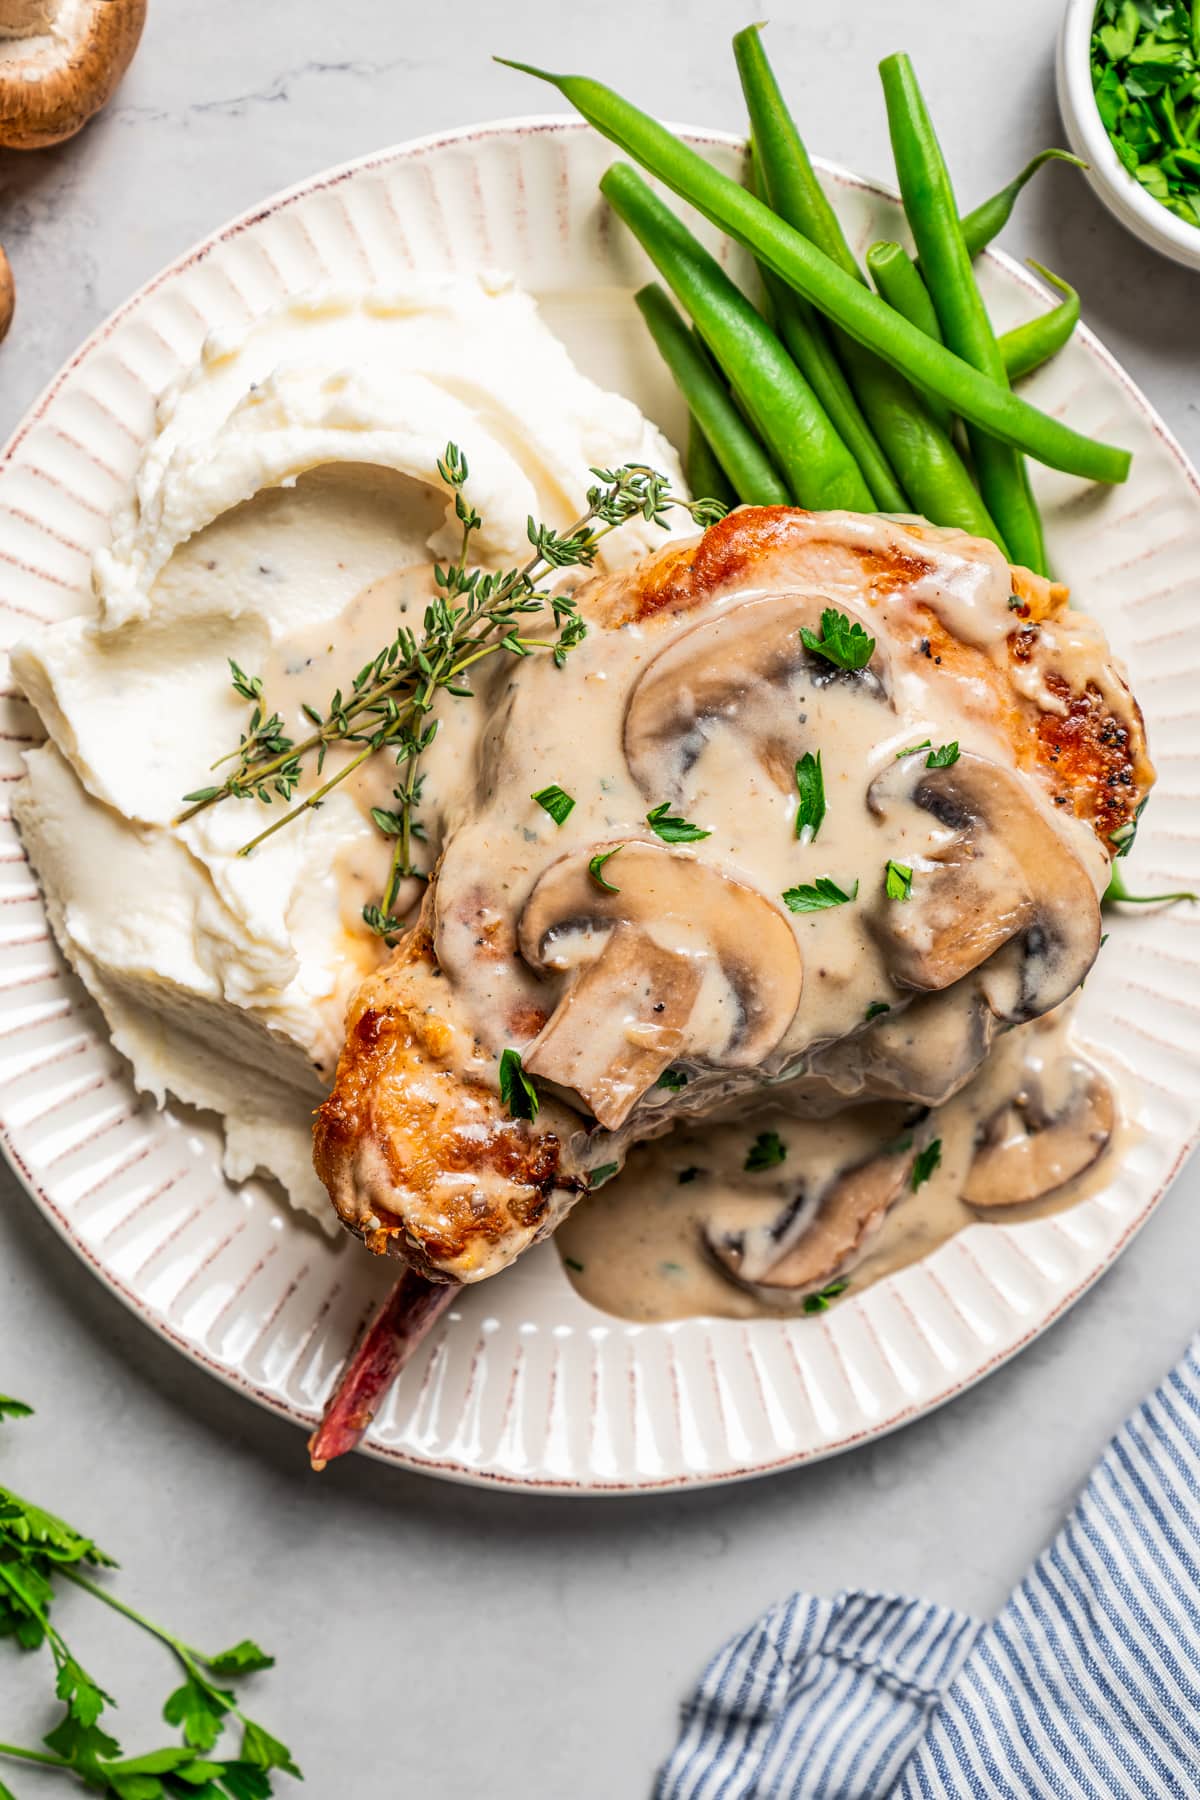 Dinner plate with a pork chop, mushroom sauce, mashed potatoes, and green beans.